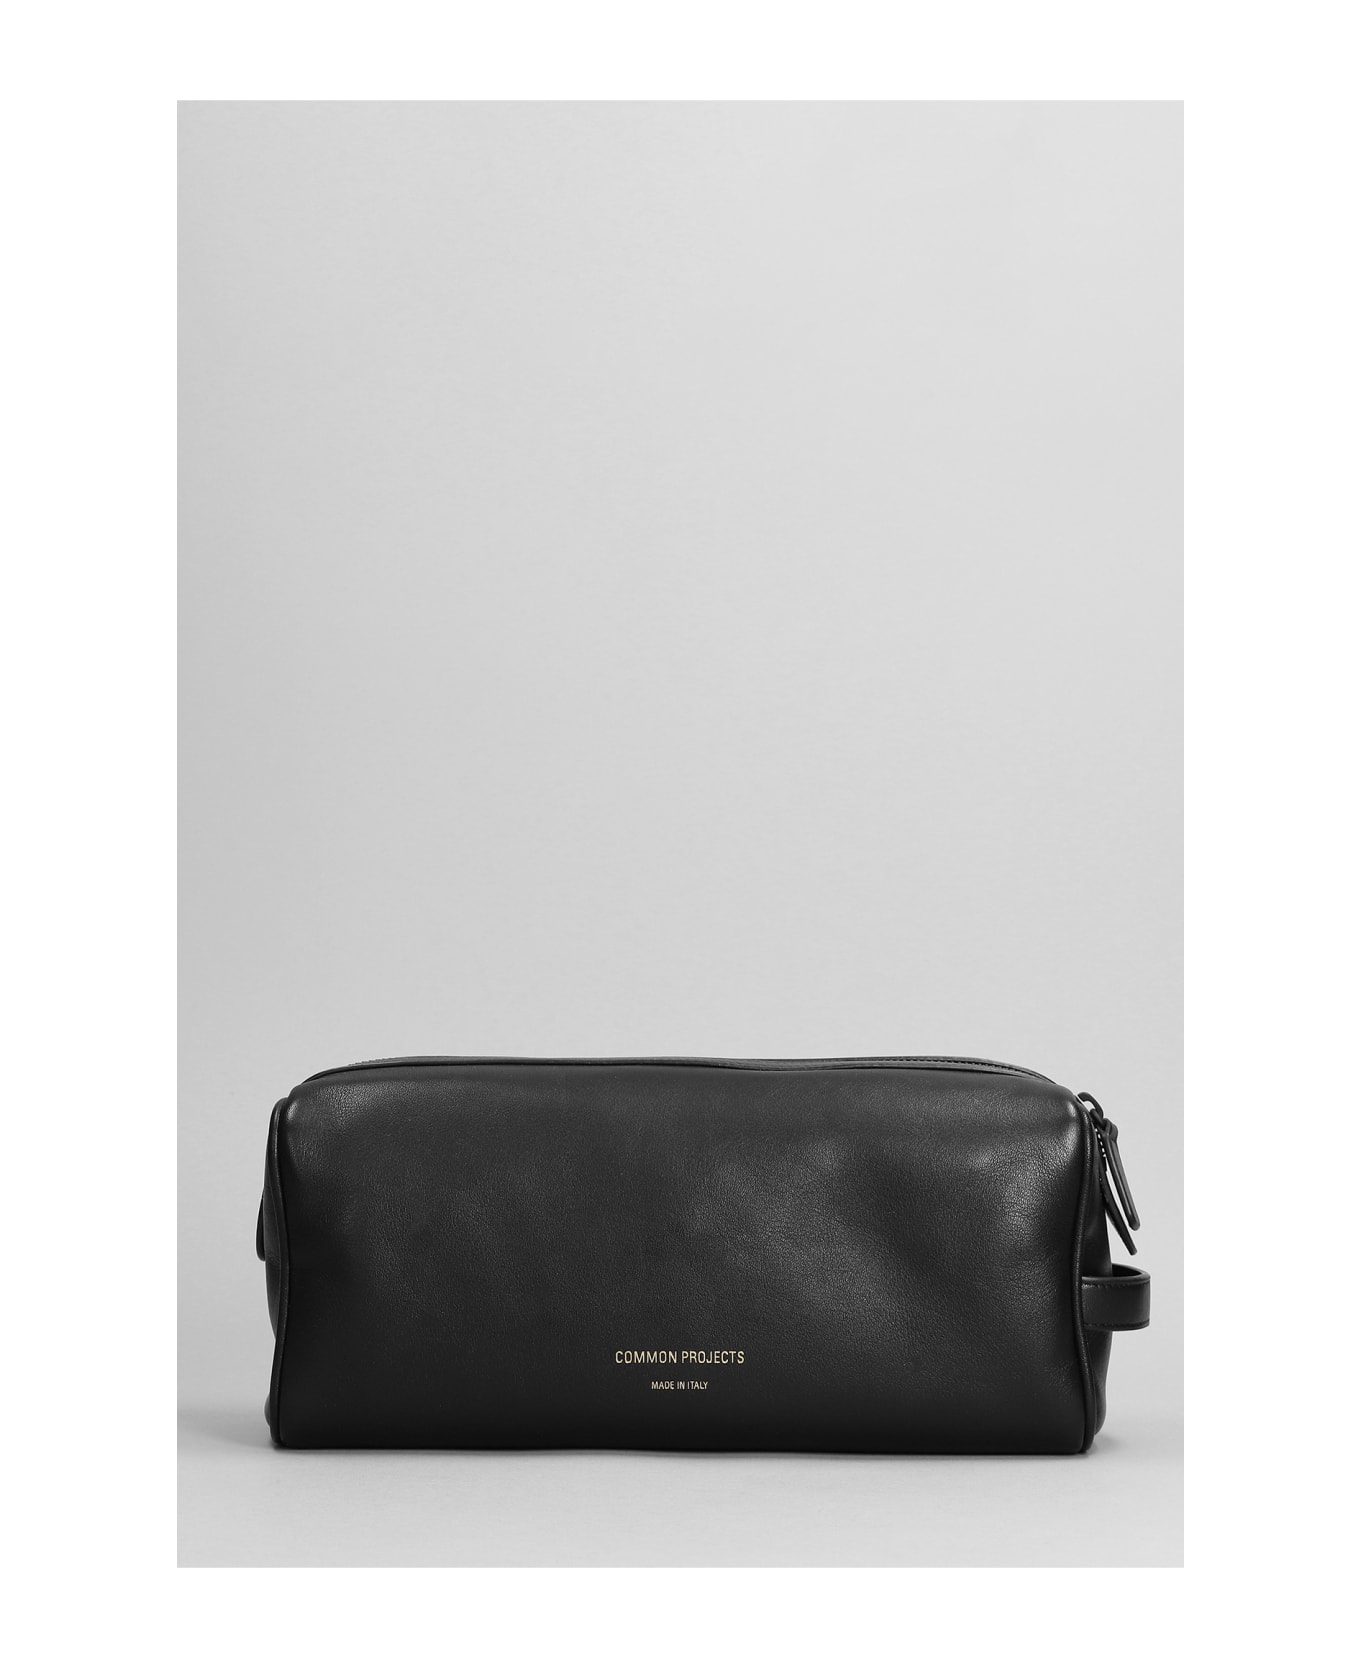 Common Projects Hand Bag In Black Leather - black